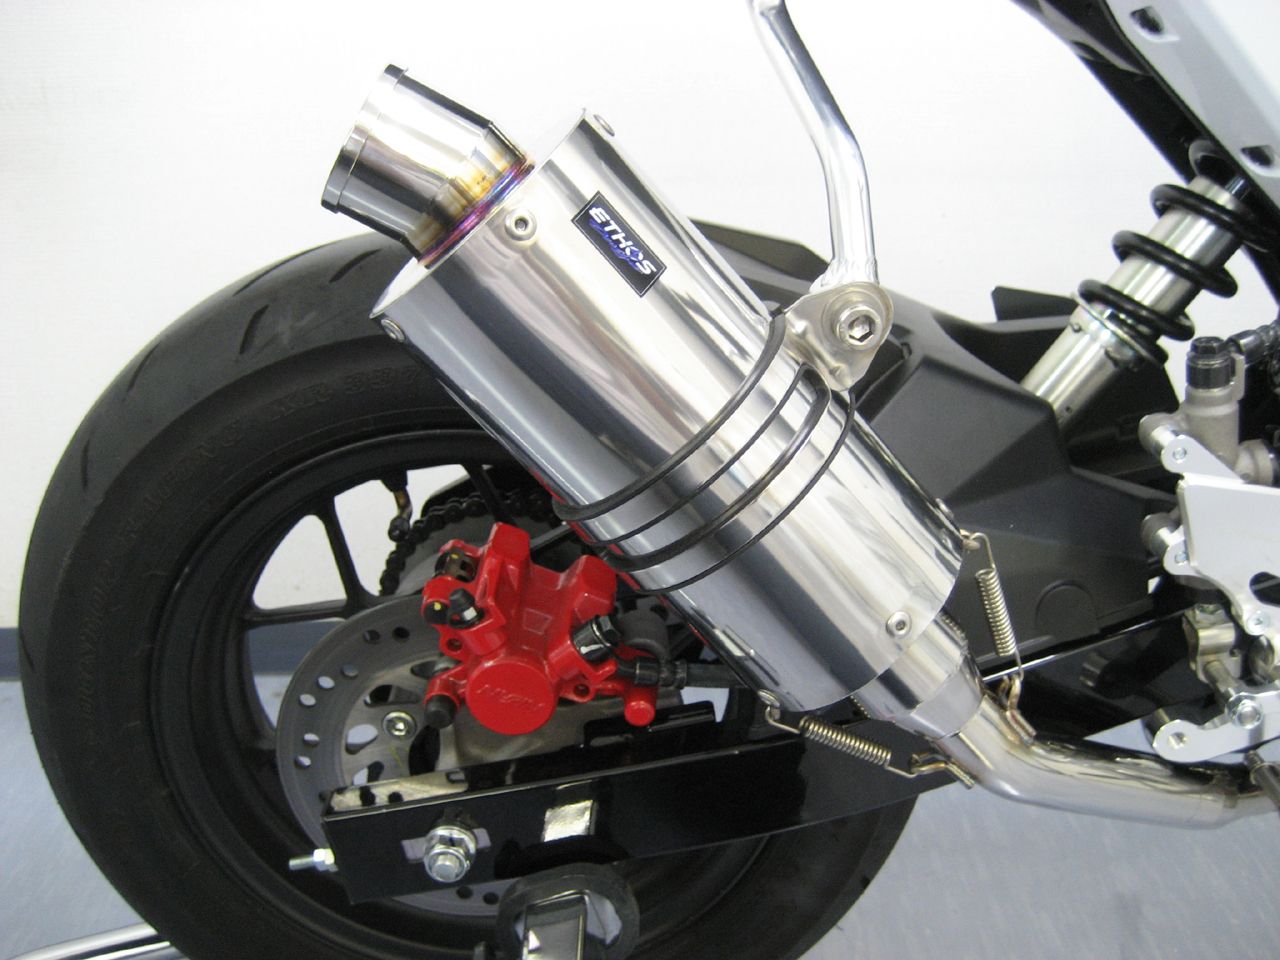 grom21280 - Corresponds to GROM Cup! A New Slip-on Exhaust for MSX125(GROM)!